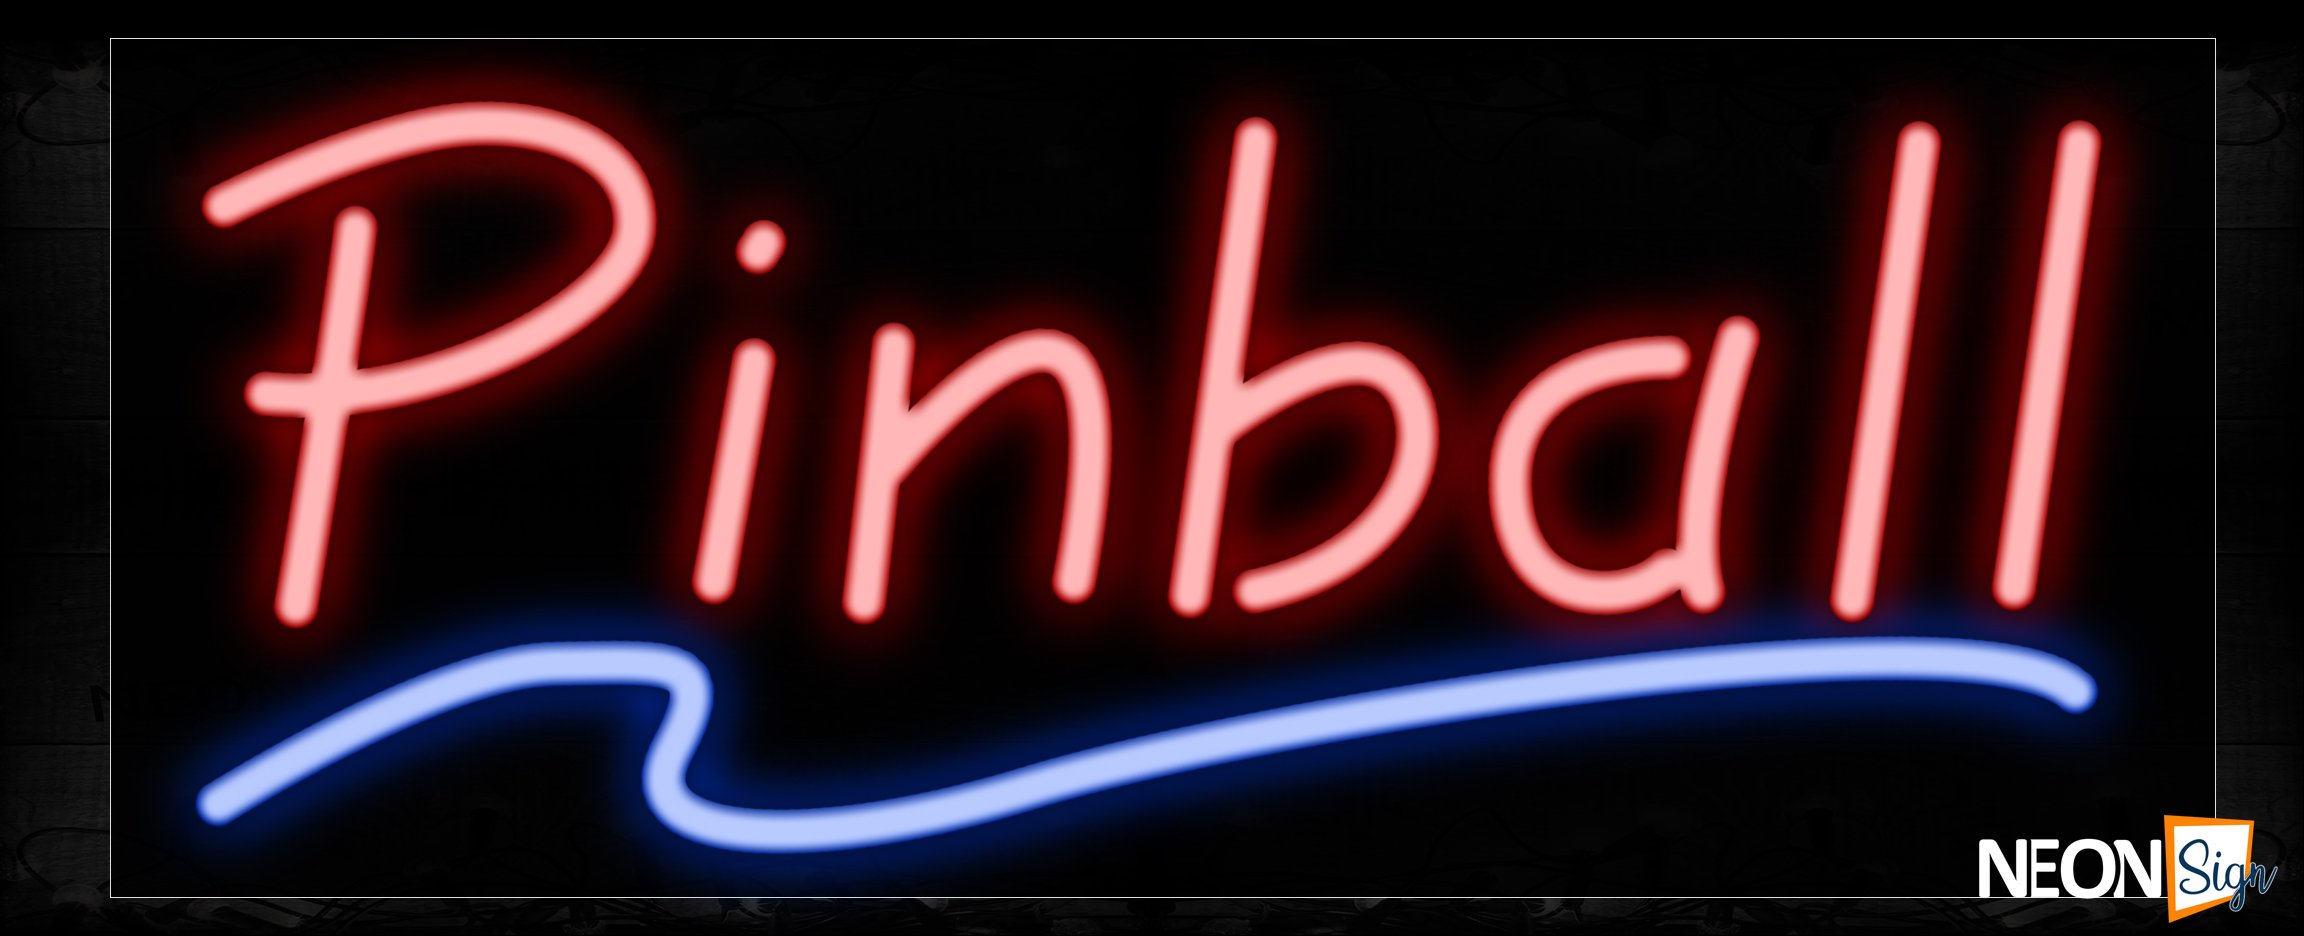 Image of 10403 Pinball in red with blue line Neon Sign_13x32 Black Backing